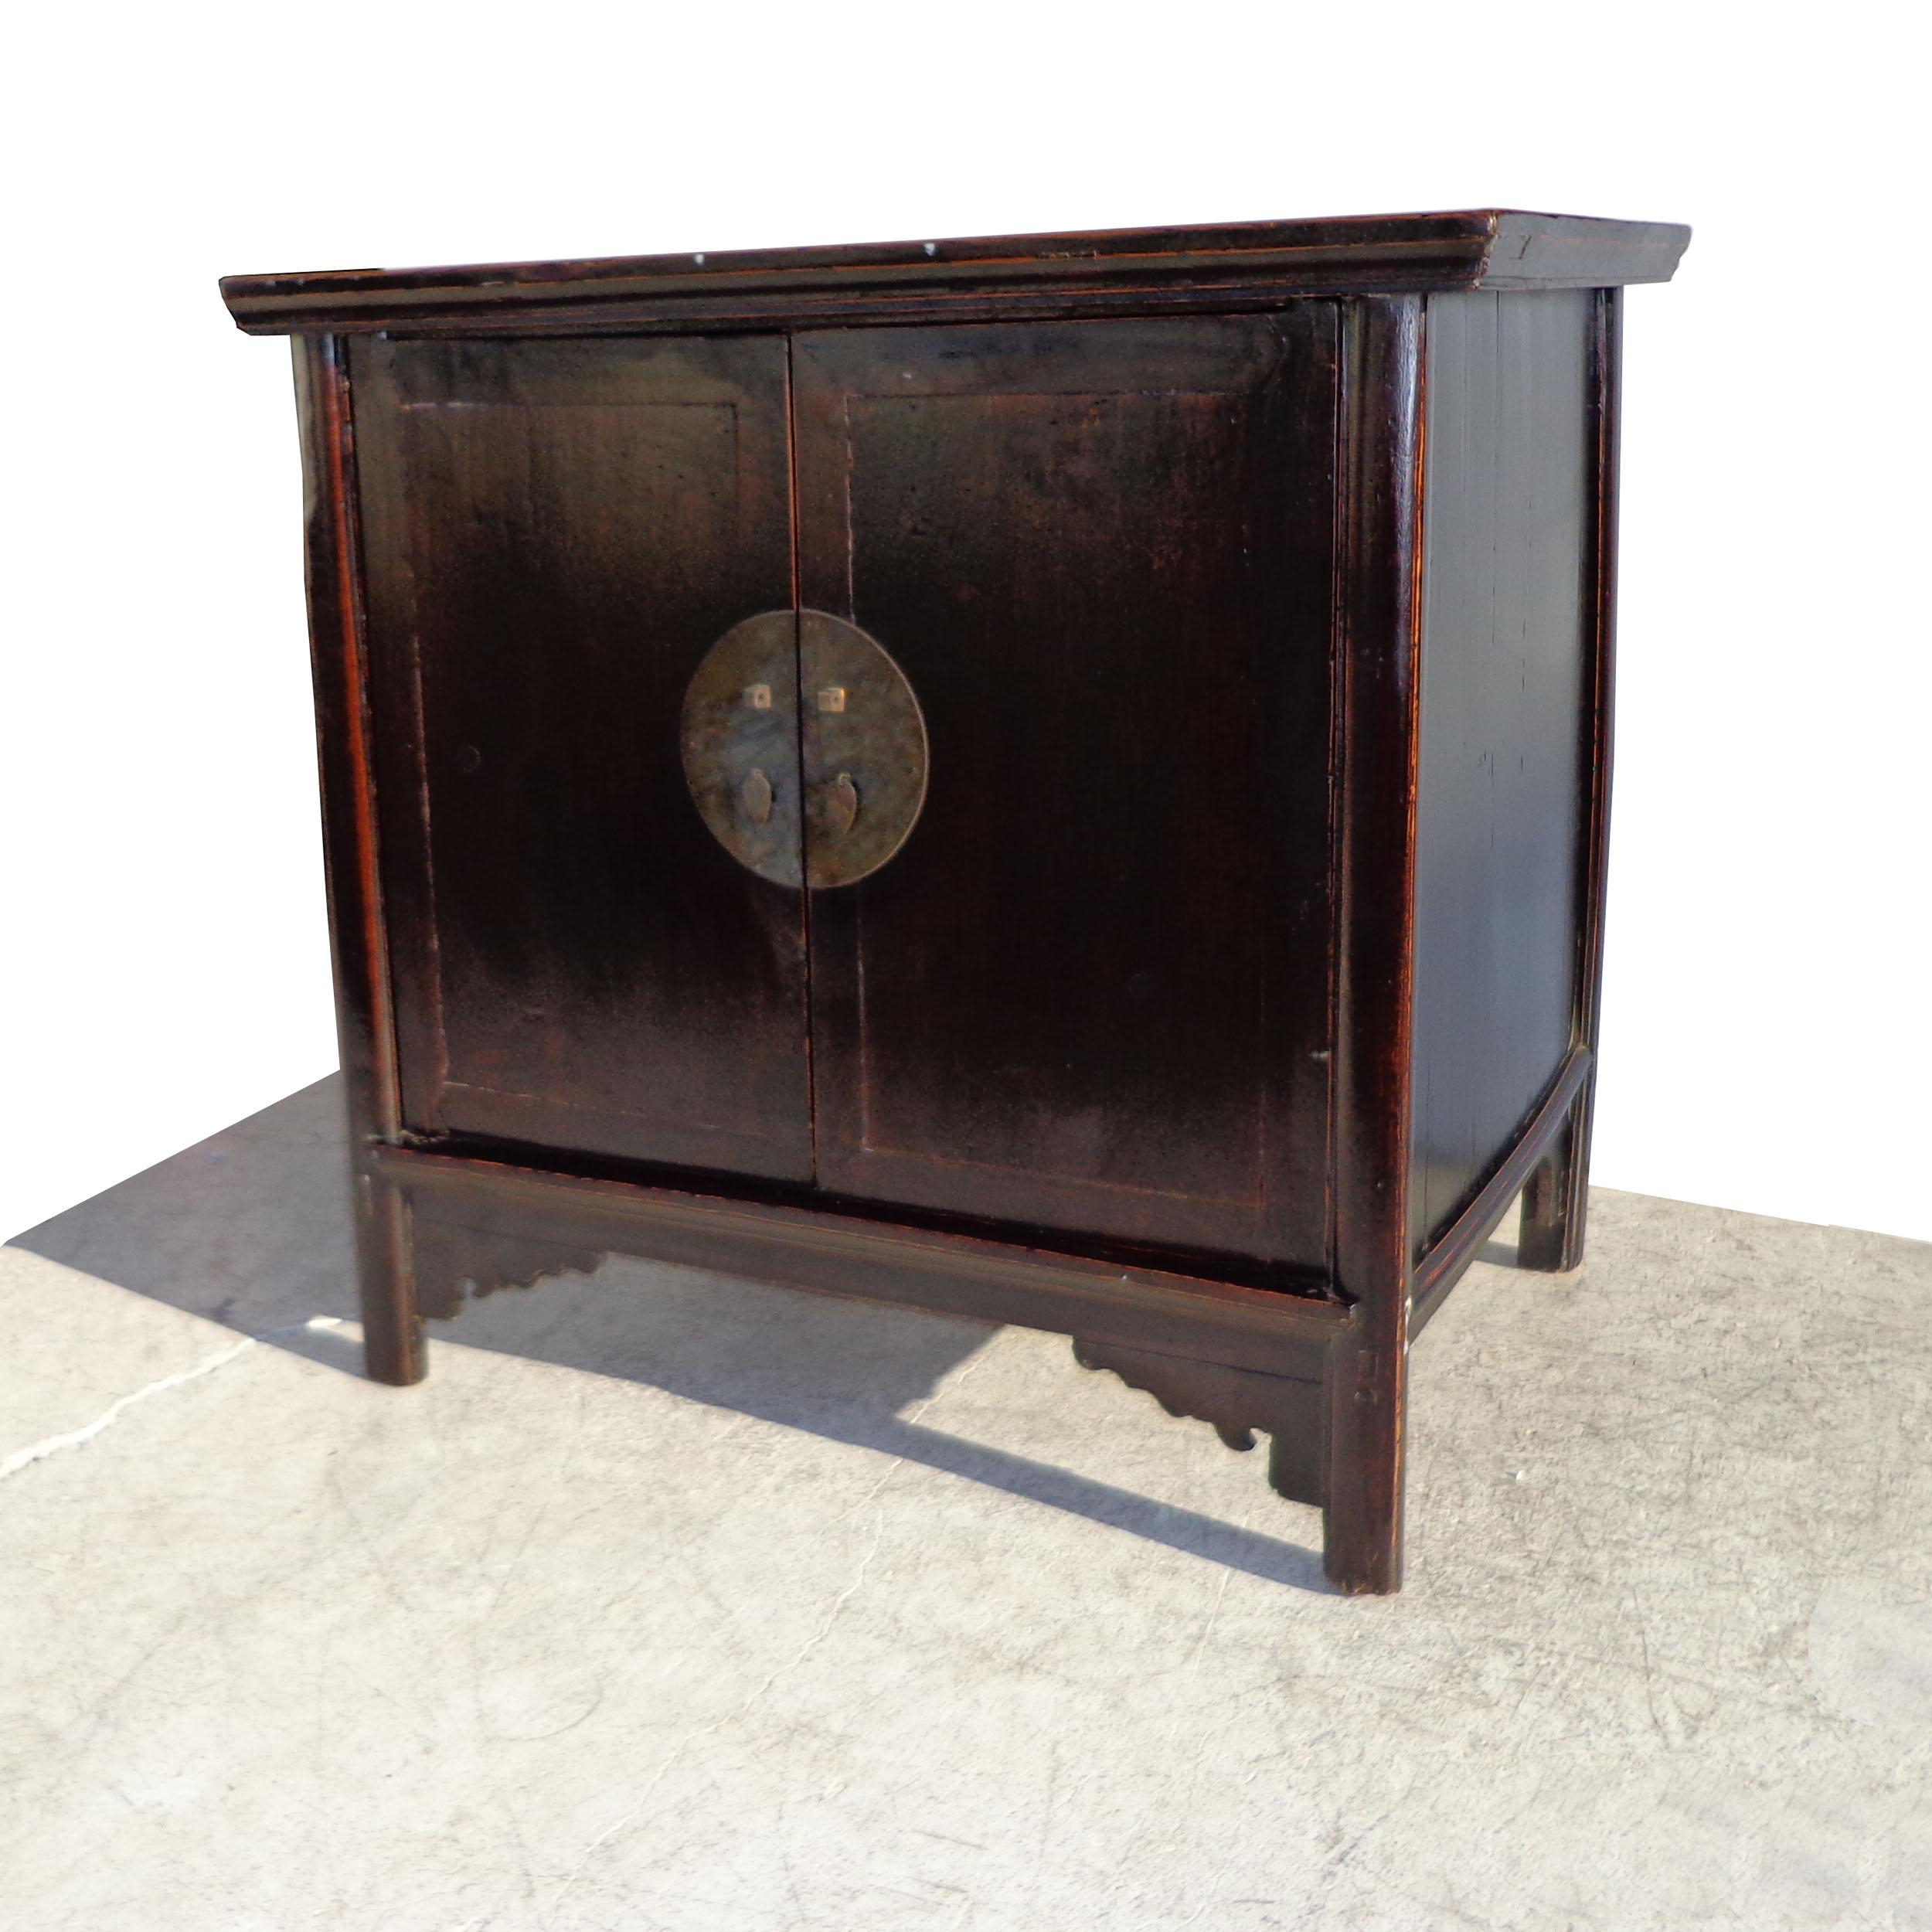 Created in China during the Qing Dynasty, this cabinet features two doors, fitted with a bronze medallion. Four straight legs with carved apron in the front. Beautiful patina in dark elm finish with red undertones.